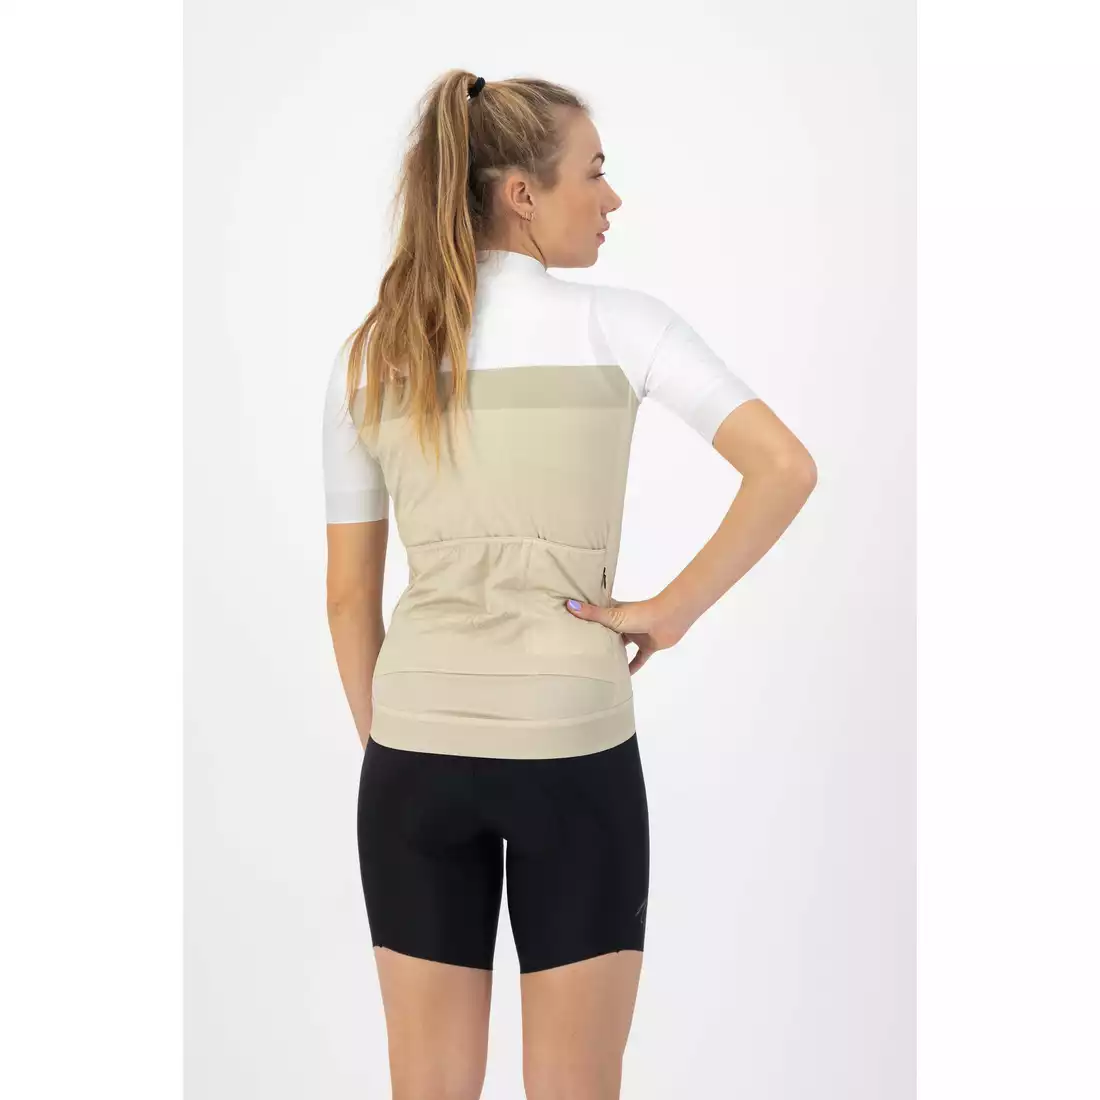 ROGELLI PRIME Women's cycling jersey, beige and white